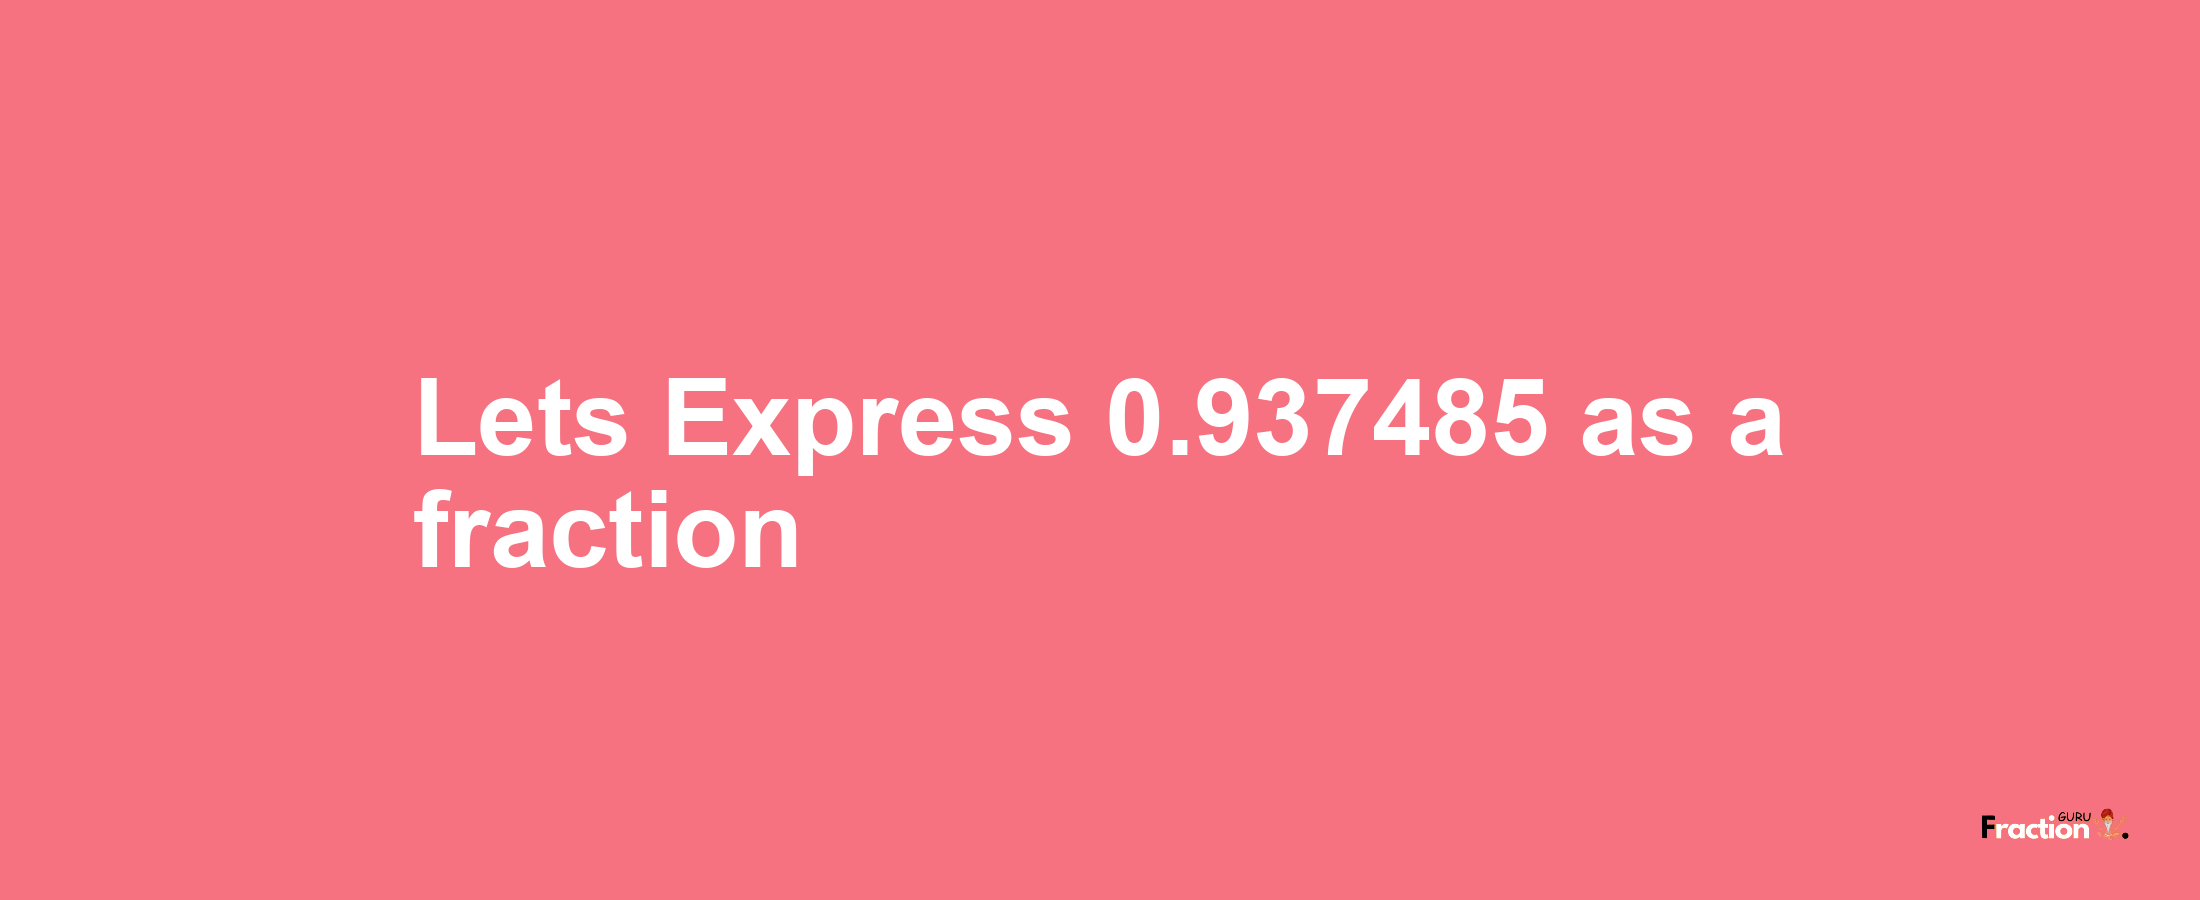 Lets Express 0.937485 as afraction